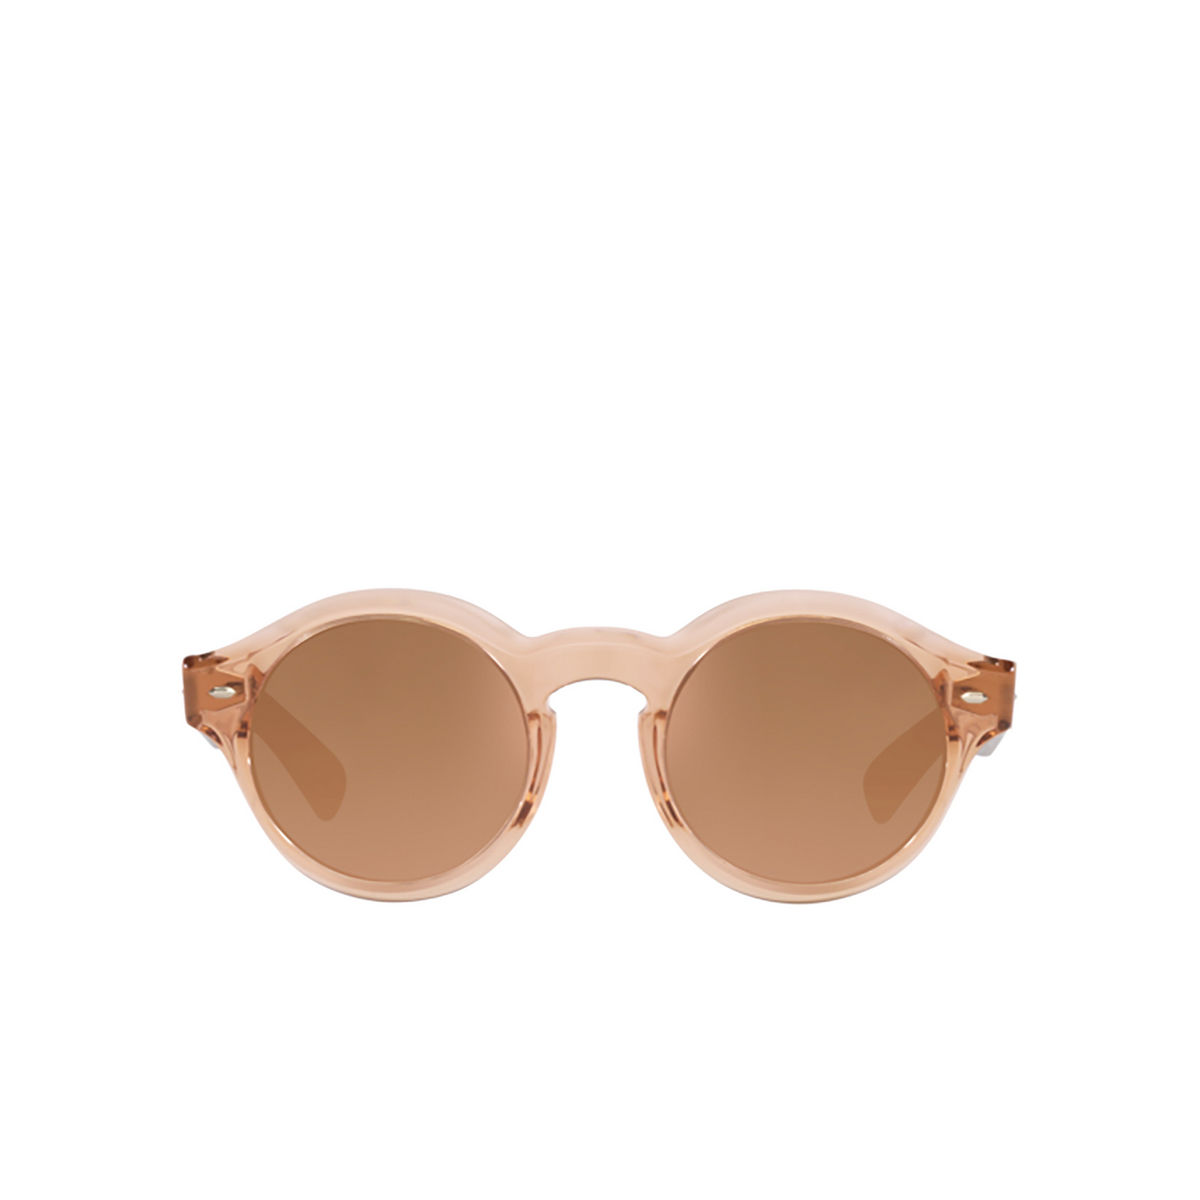 Oliver Peoples CASSAVET Sunglasses 147142 Blush - front view